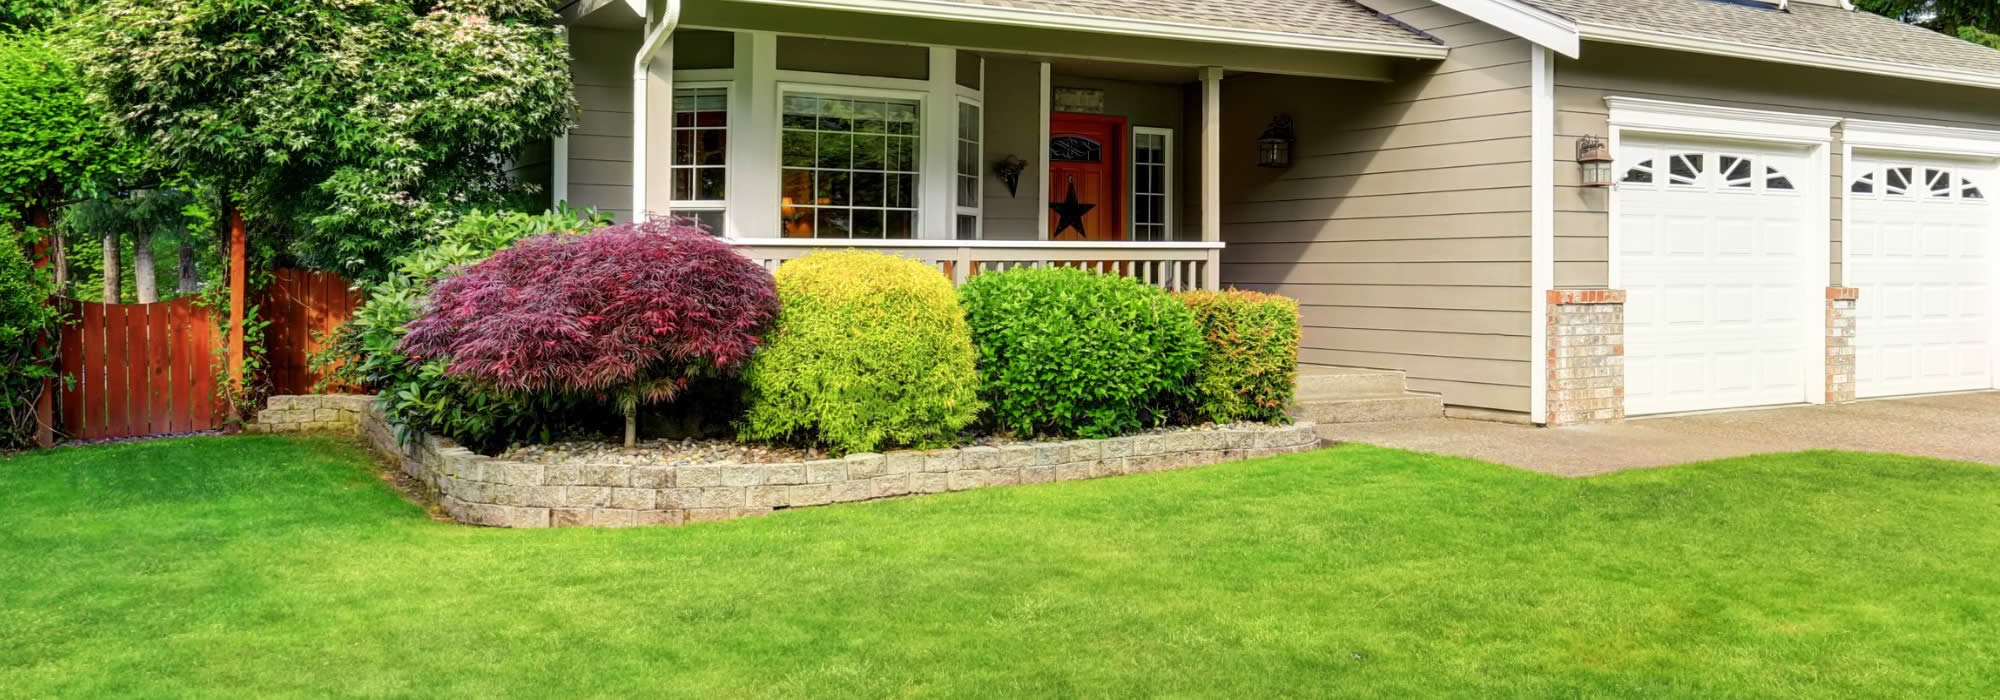 Landscaping Services in Marshall